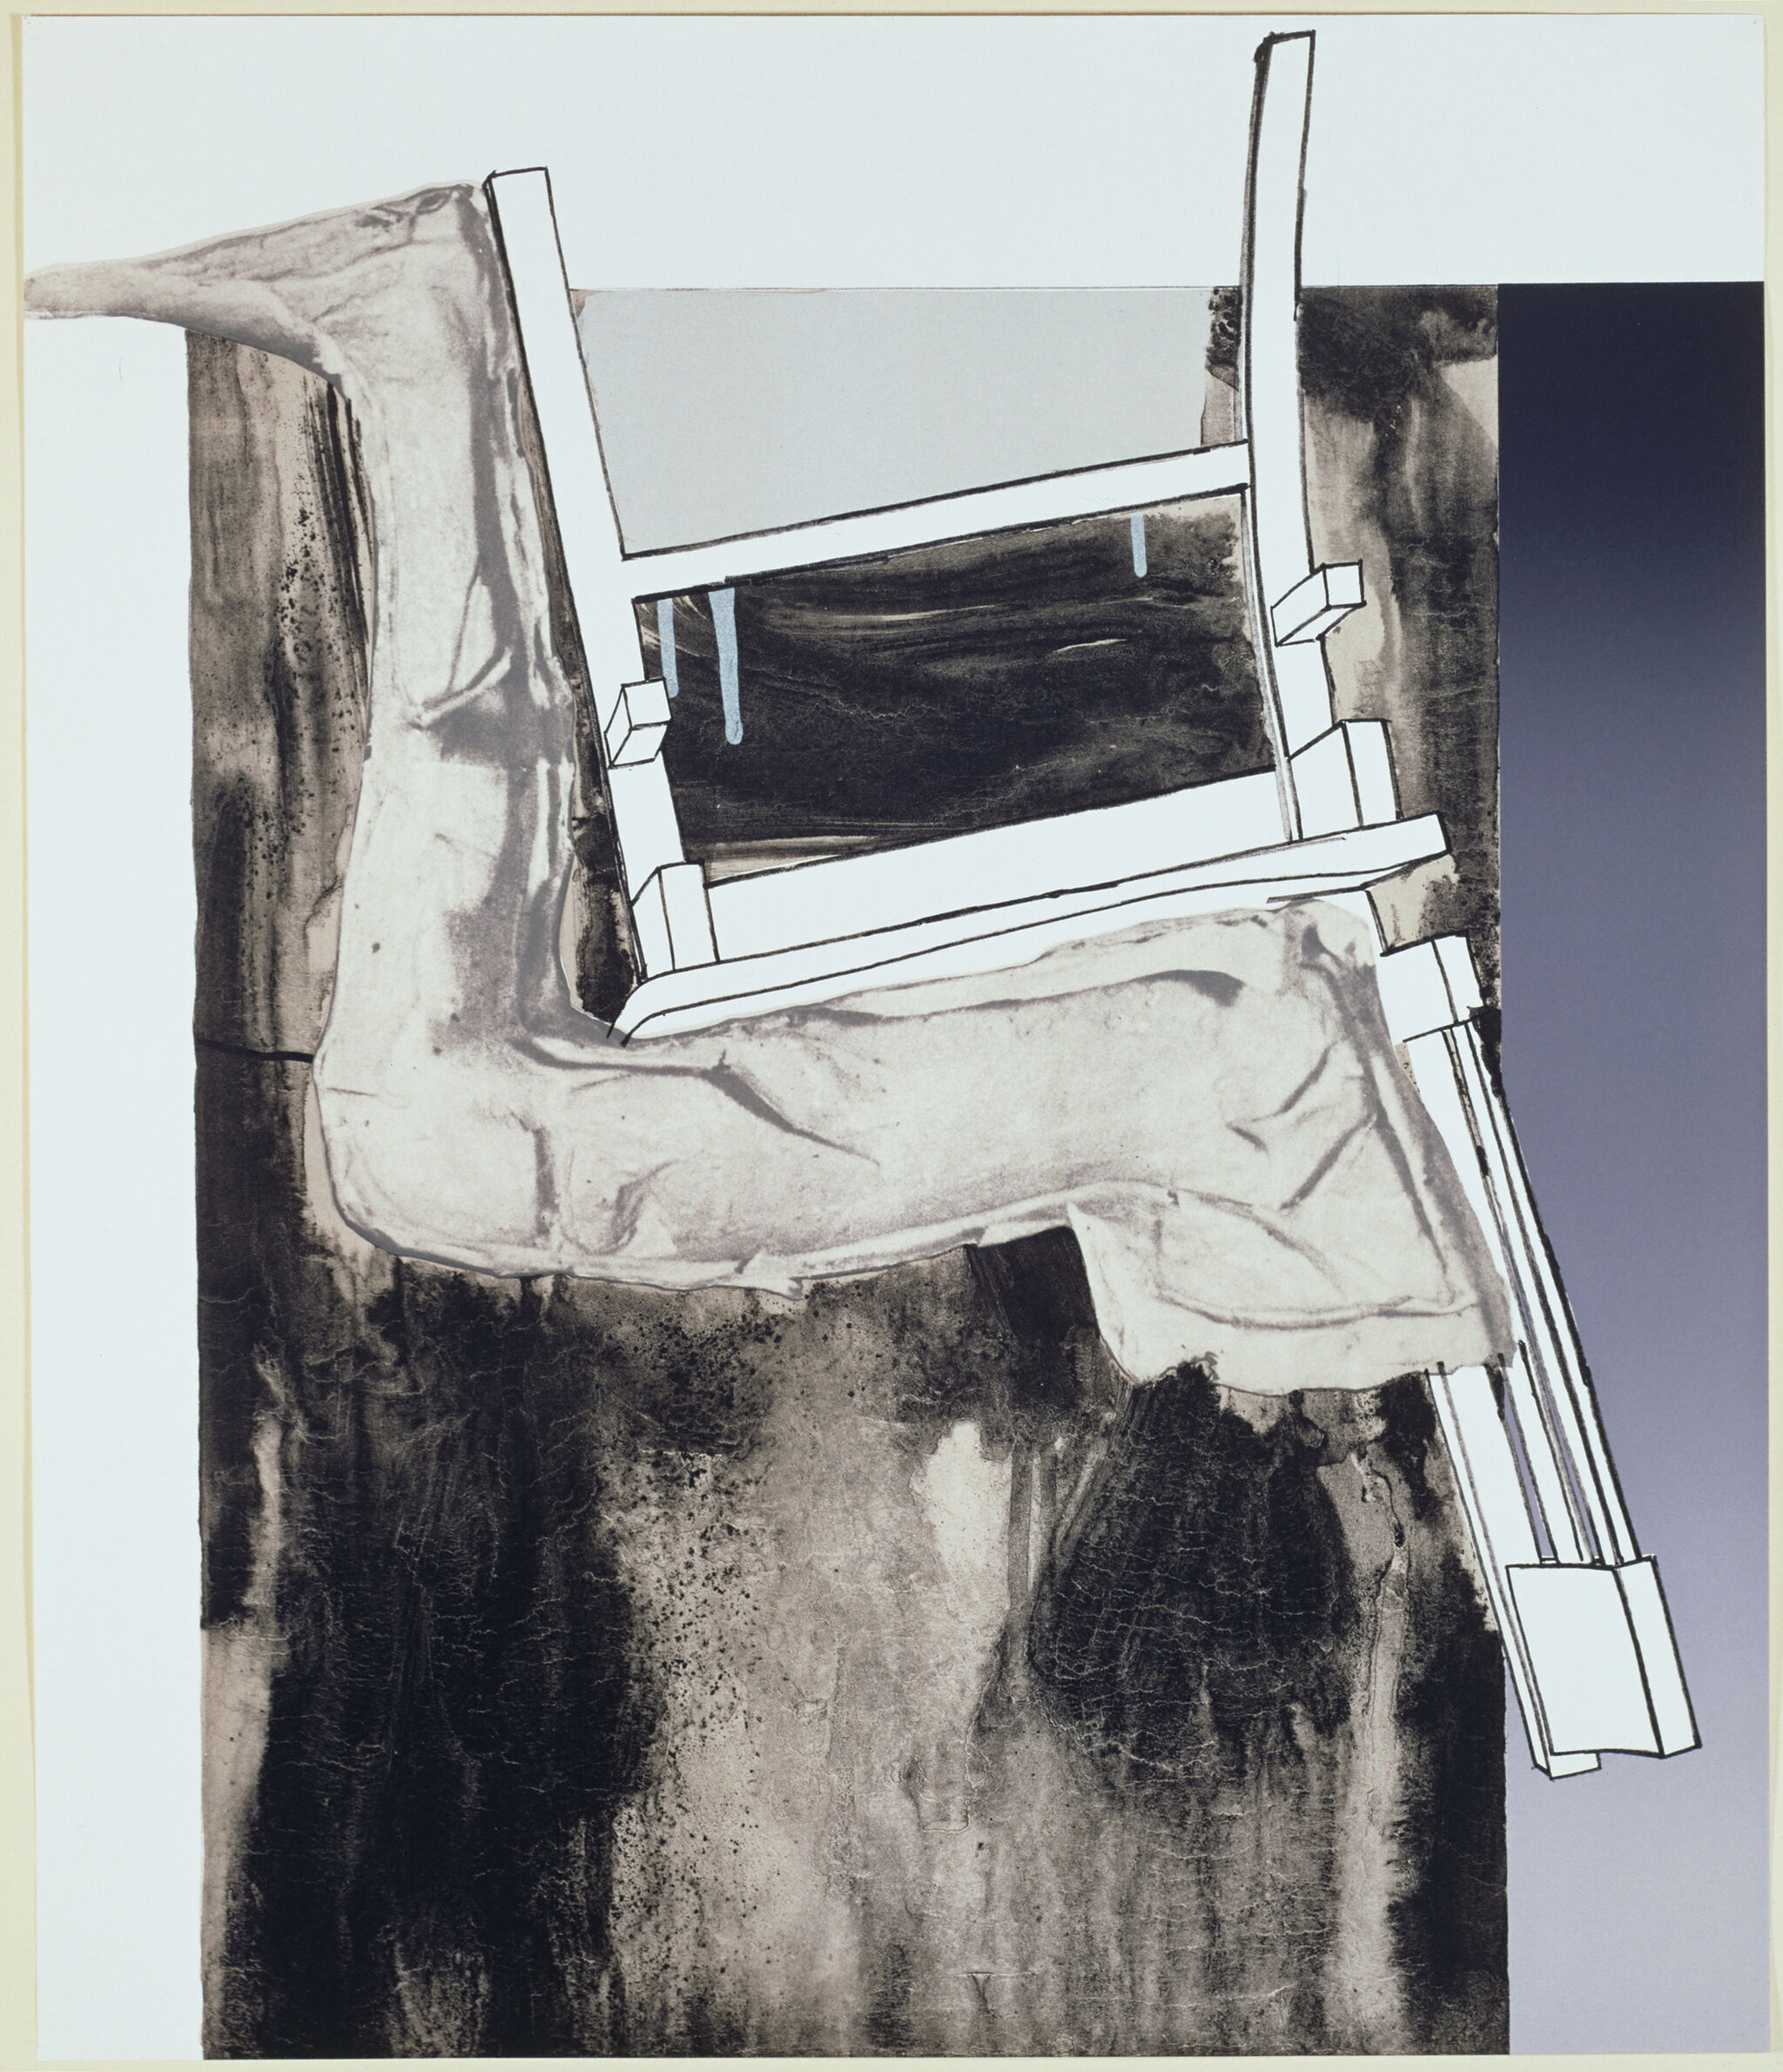 Abstract composition of an upside-down sketched chair with a single leg seated in it, which spills over its background of rectangles treated with mottled white and black, and blue-gray gradient.